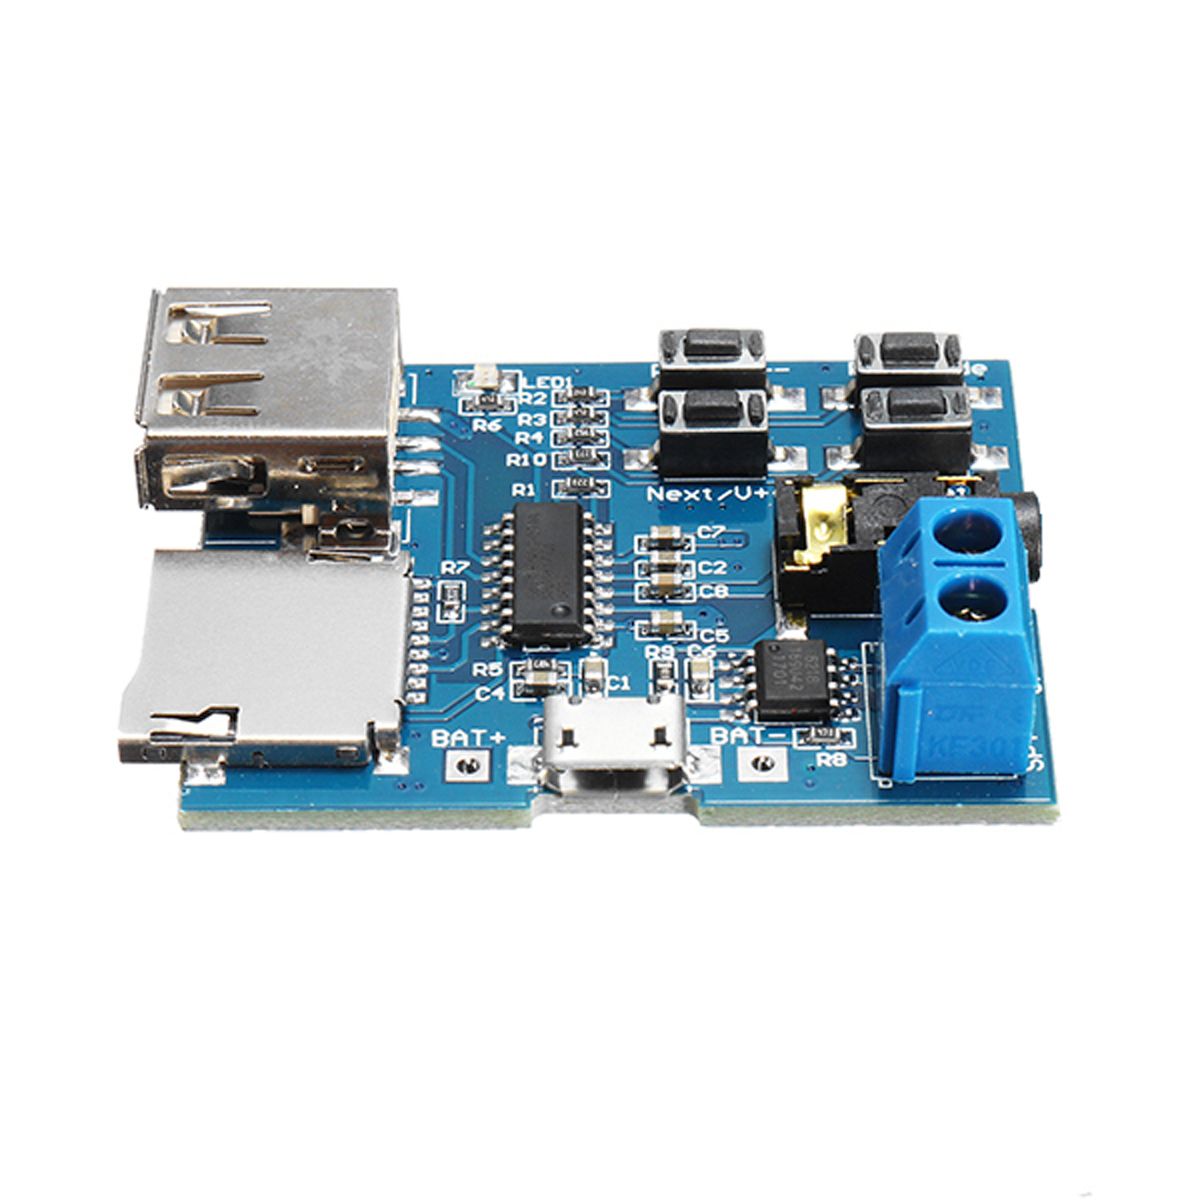 30pcs-MP3-Lossless-Decoder-Board-With-Power-Amplifier-Module-TF-Card-Decoding-Player-1366968